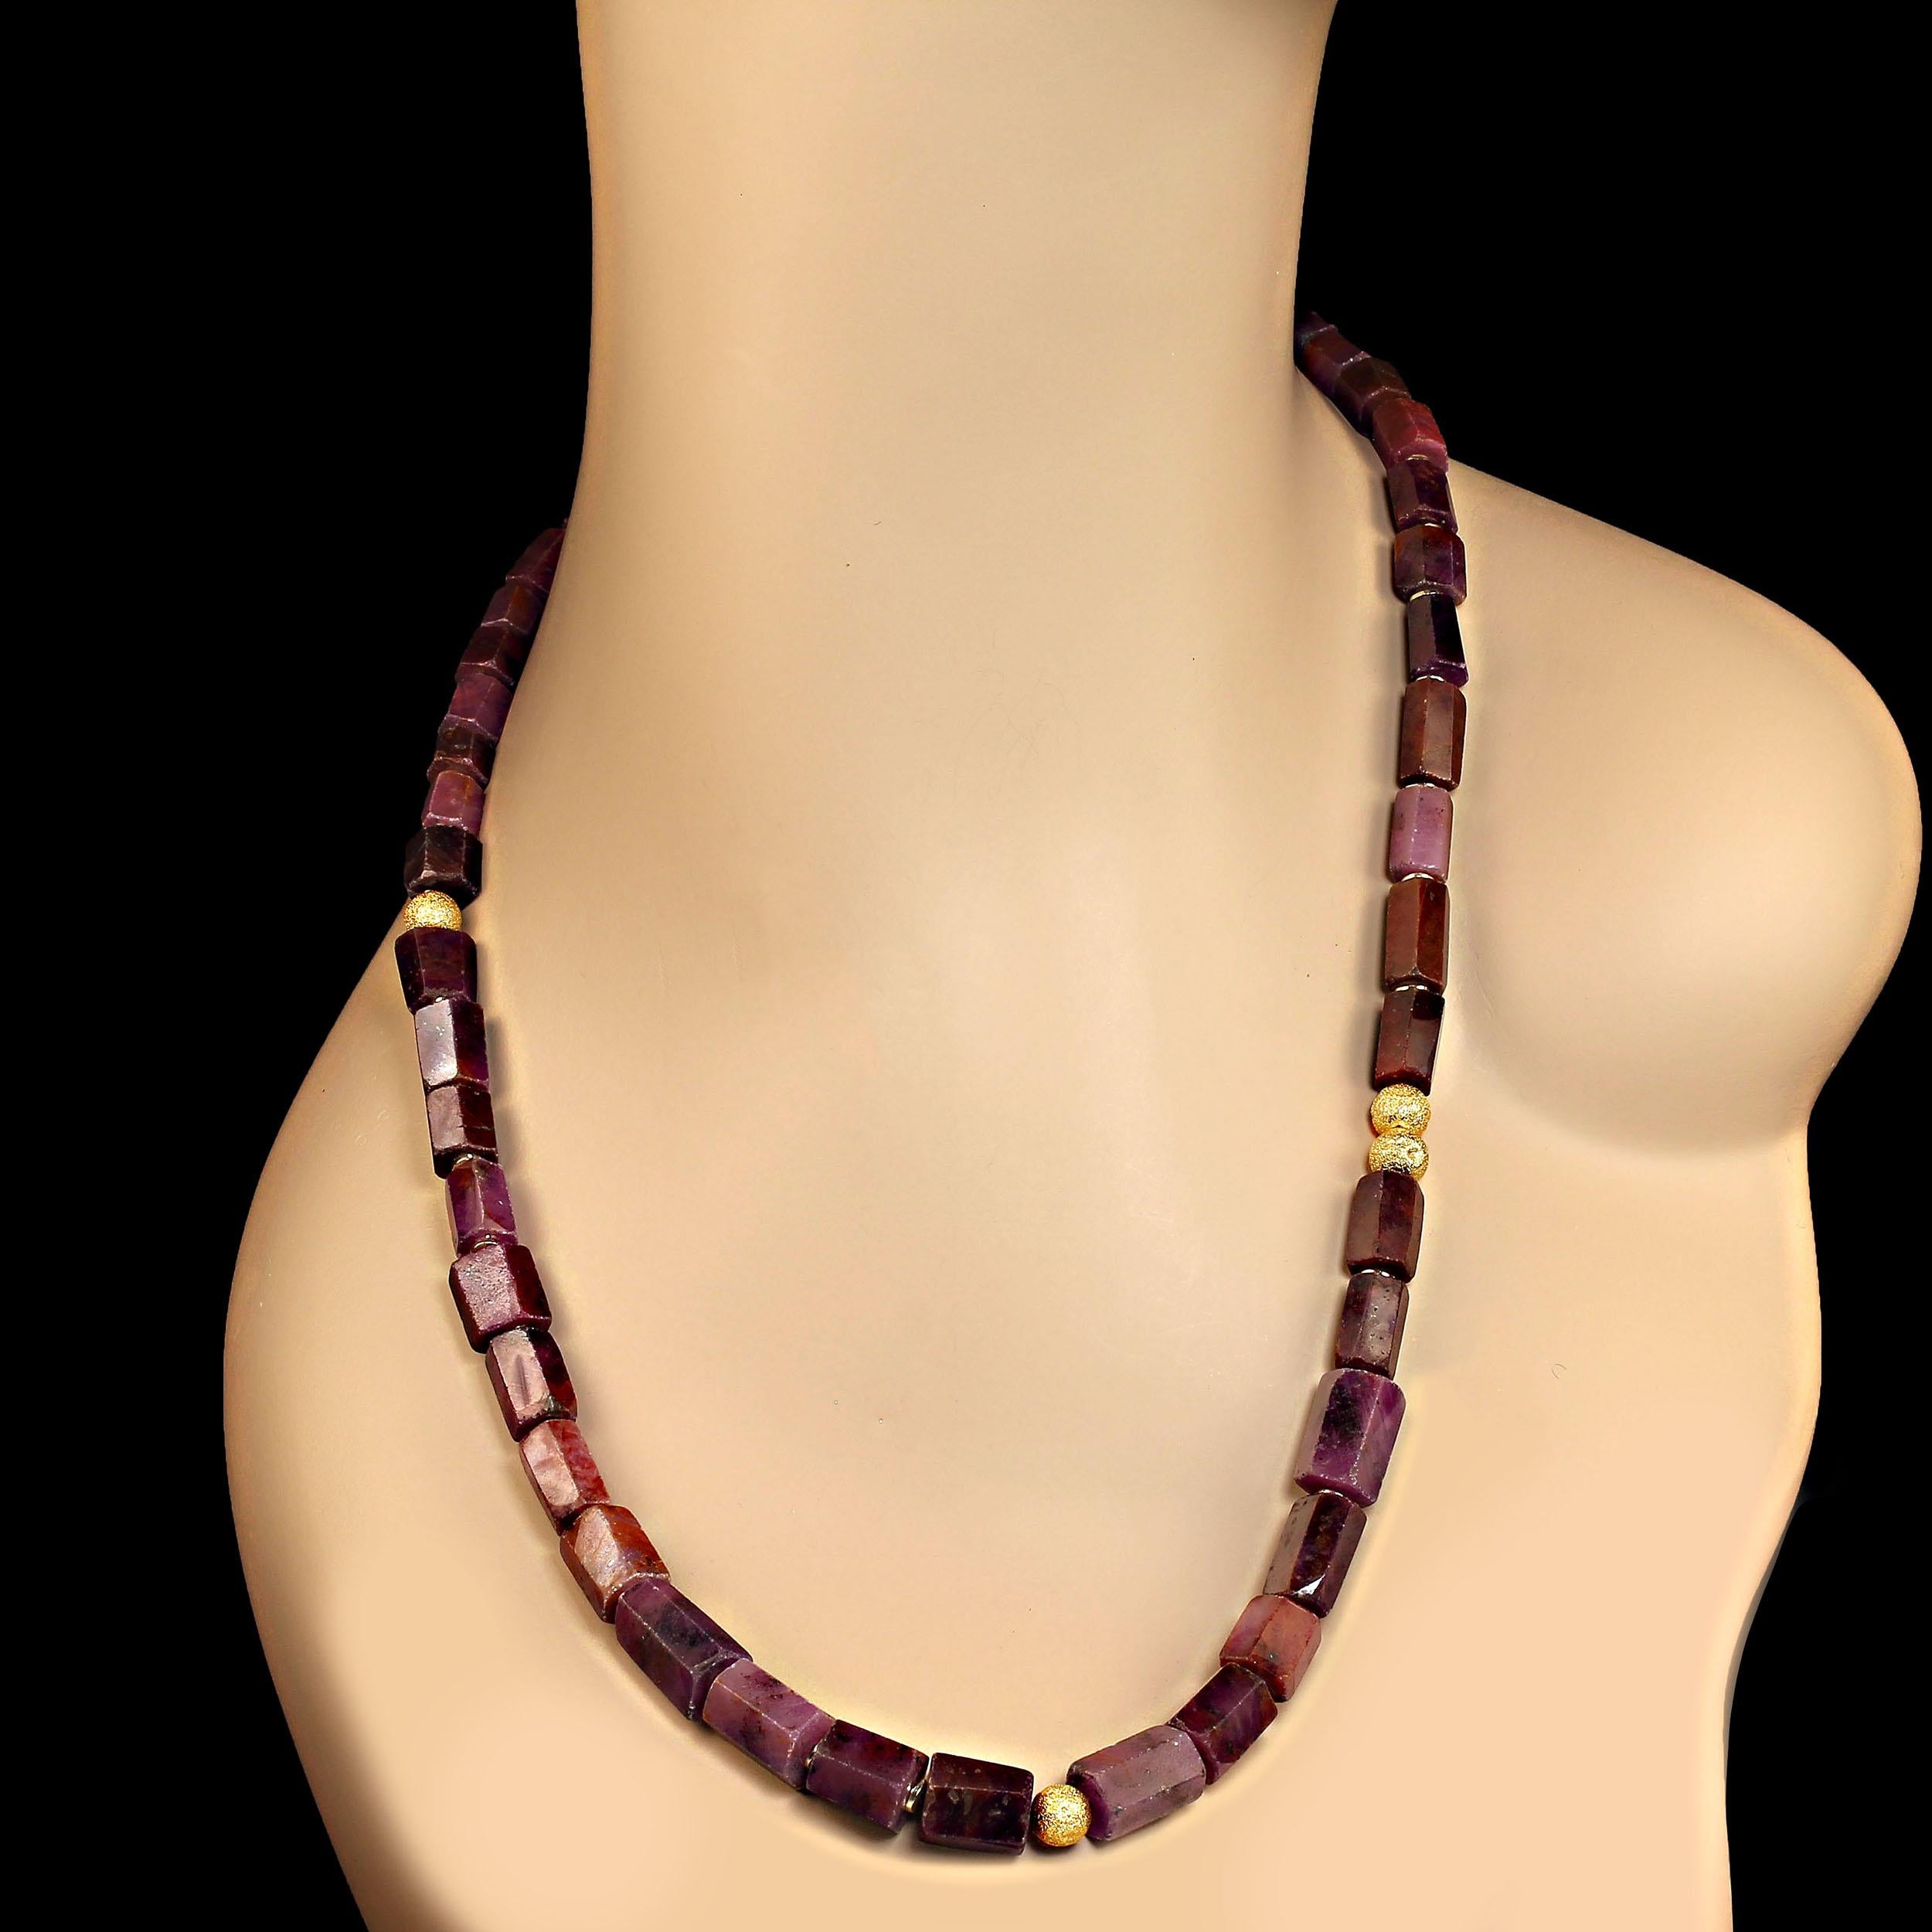 23 inch necklace